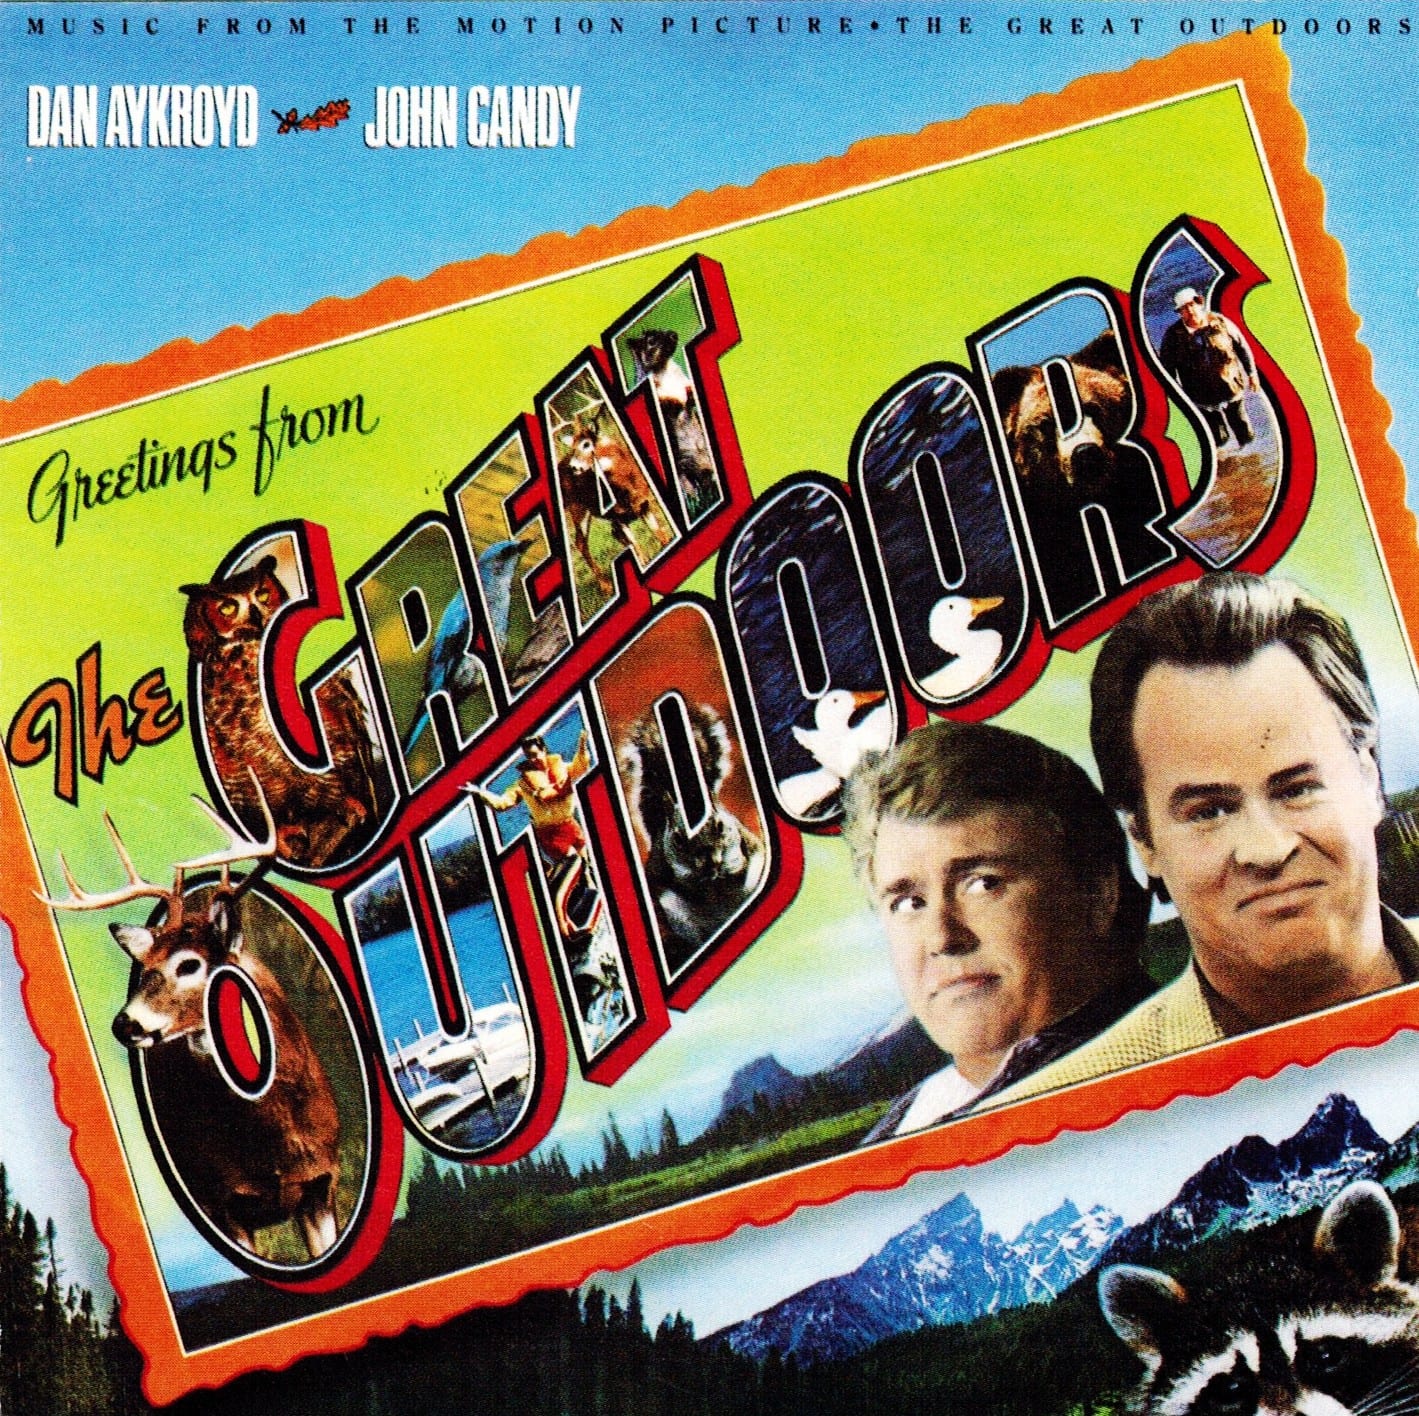 The Great Outdoors - Original Soundtrack (EXPANDED EDITION) (1988) 2 CD SET 1